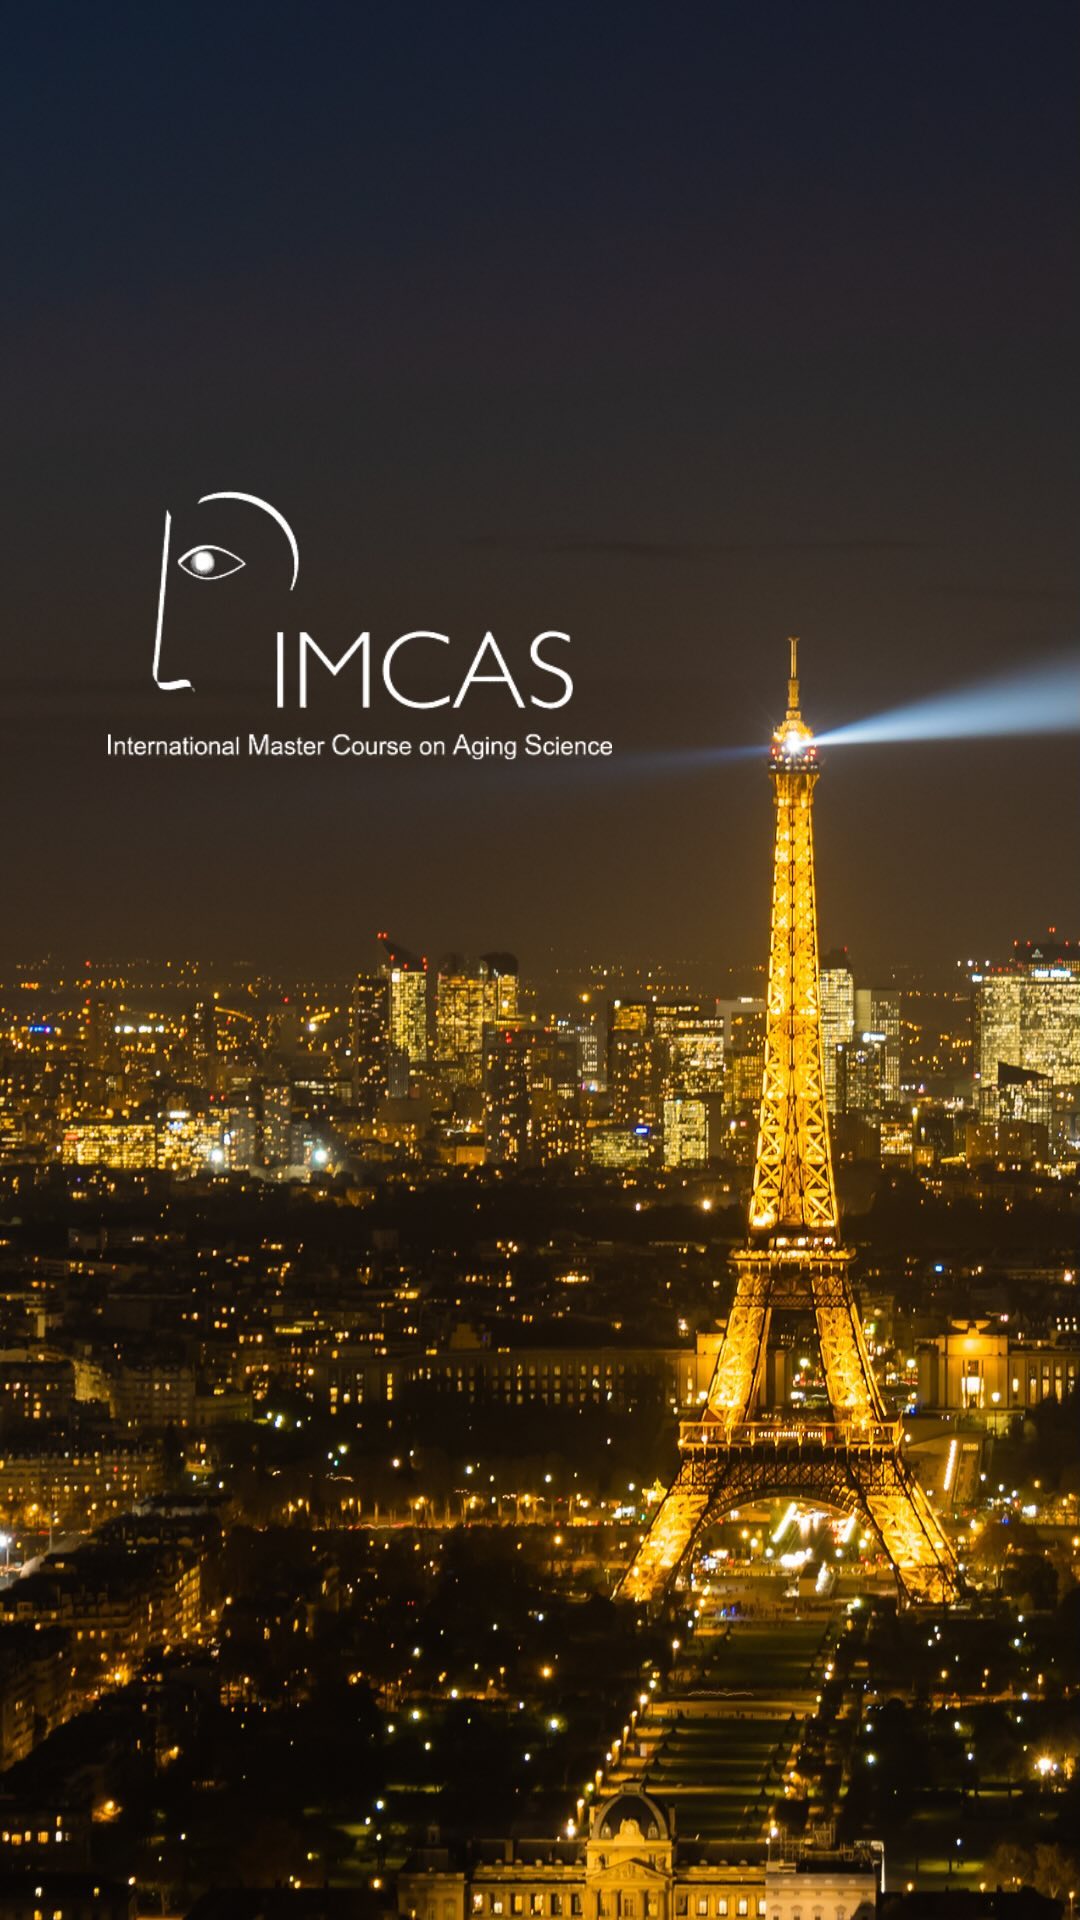 IMCAS 2023 is a wrap! What an amazing few days of education & networking in Paris, France. Thank you @emmawynters and @revanesse for hosting us at Sir Winston - it was a fabulous evening with new friends! @ildi_arlette, @john.arlette, @swiftbeauty, @melissakang66, @quantrellemedical 
.
.
.
.
.
.
#untilnexttime #imcas #imcas2023 #paris #revanesse #medicalaesthetics #worldcongress